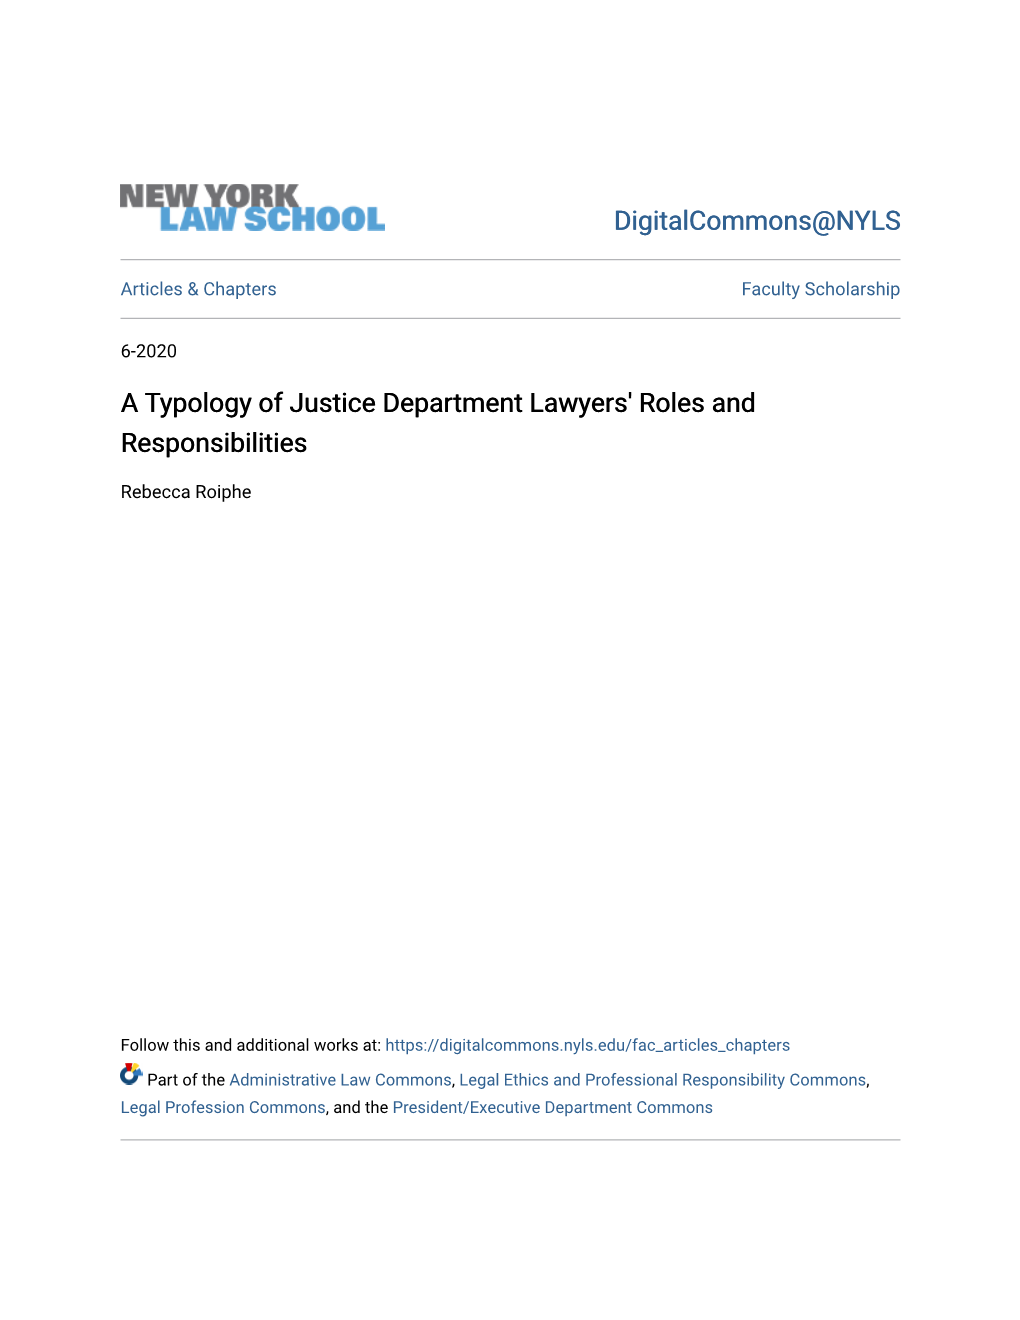 A Typology of Justice Department Lawyers' Roles and Responsibilities